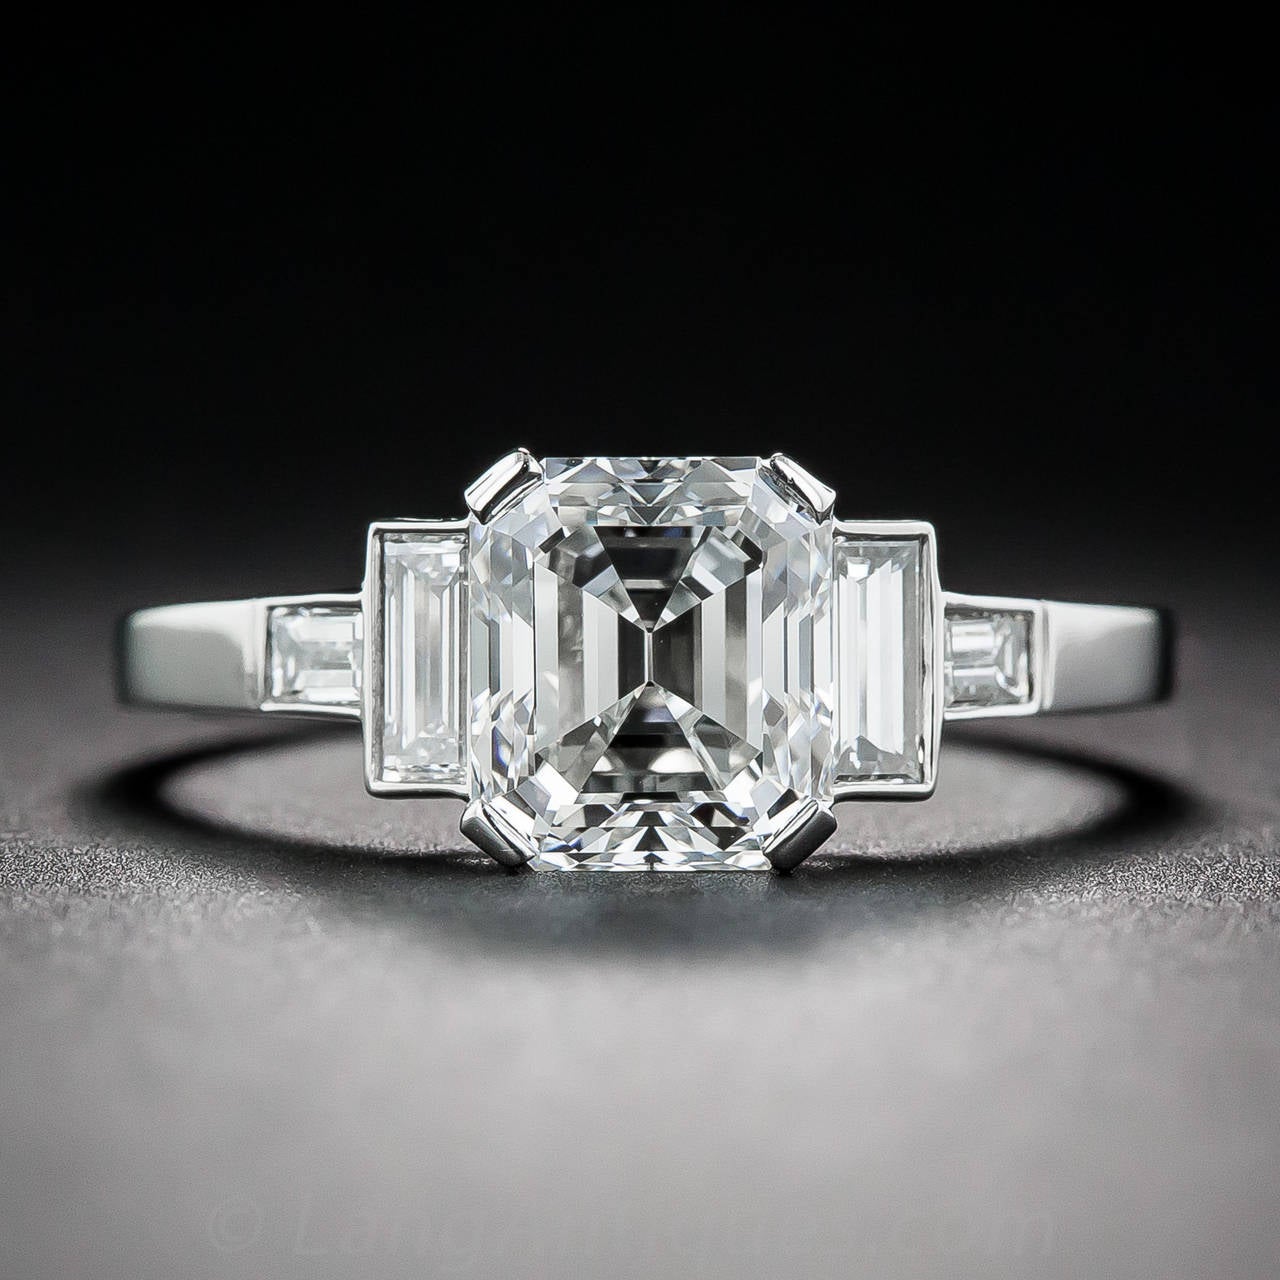 A gorgeous, classically modeled, high-color and clarity, vintage emerald-cut diamond, weighing 1.79 carat and accompanied by a GIA Diamond Grading Report stating: G color VVS1 clarity, beams brightly between two pairs of perpendicularly arrayed